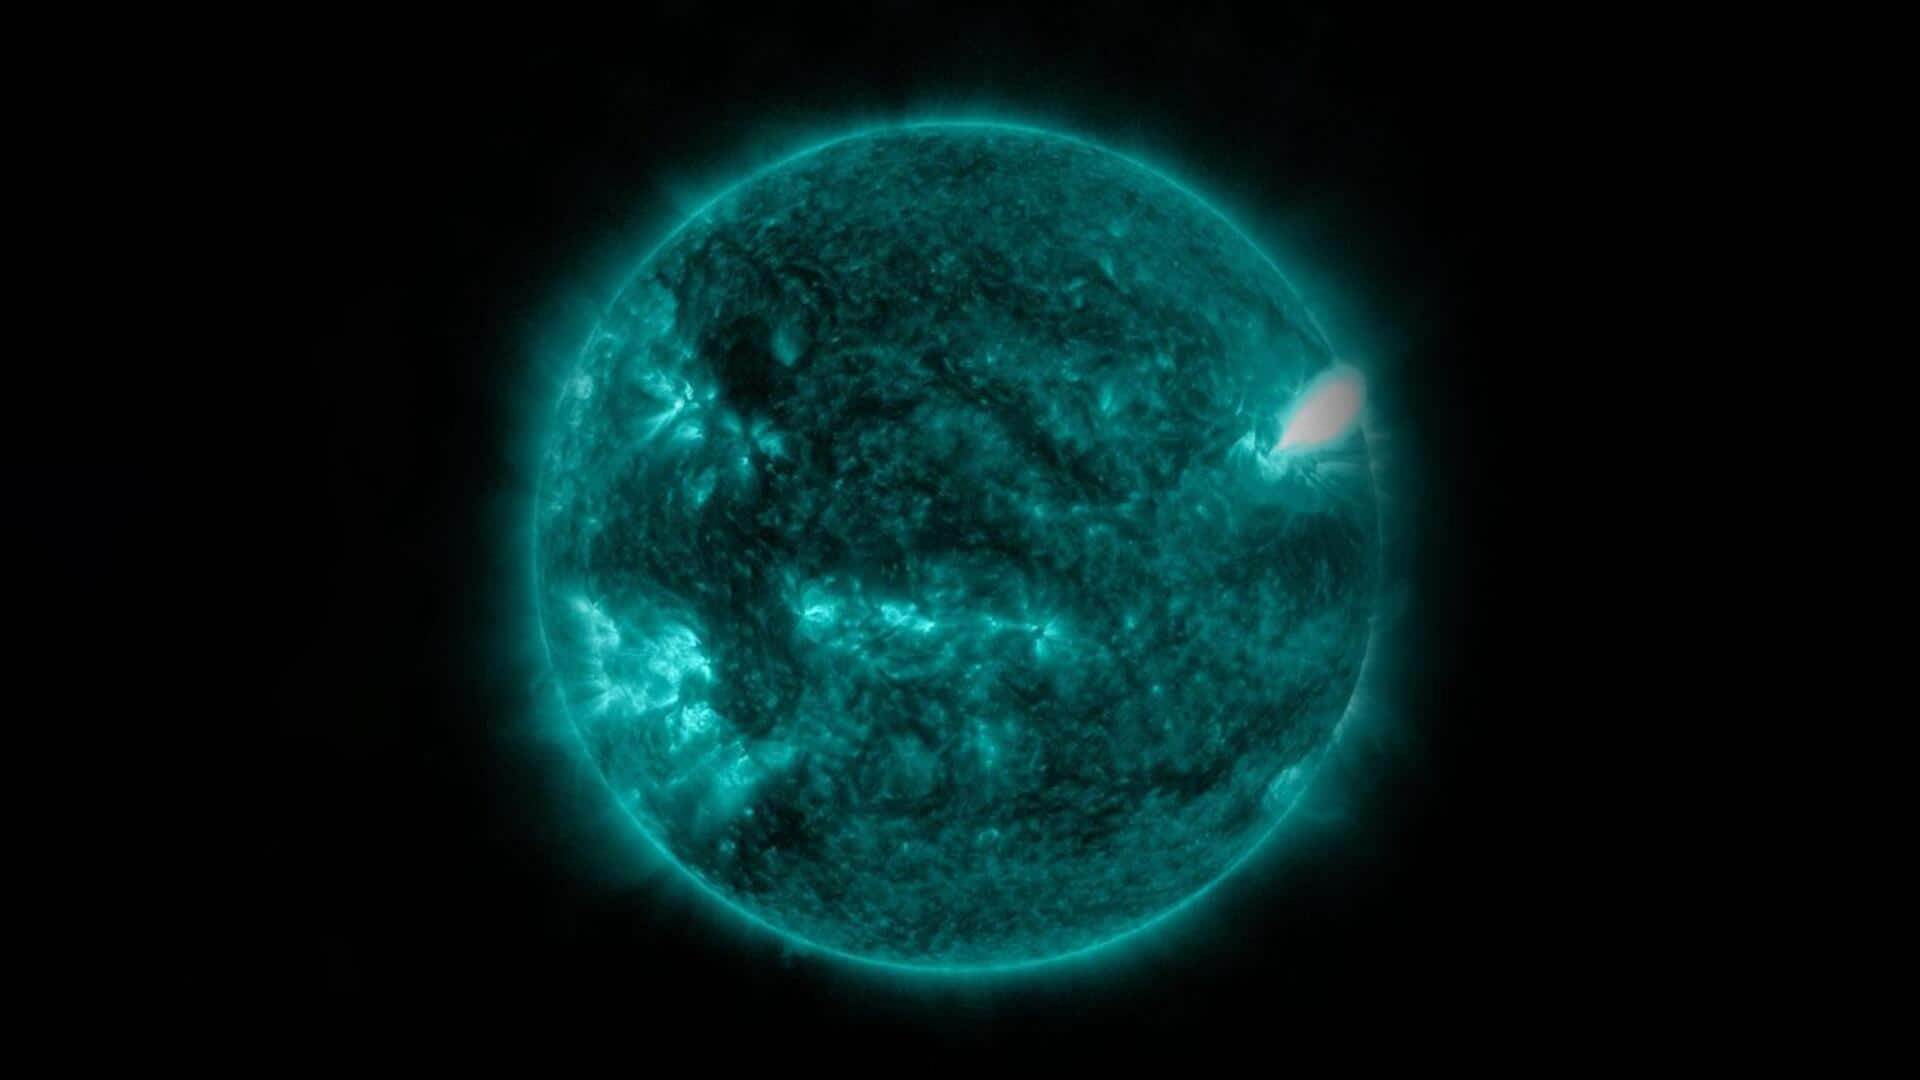 Sun expels X-class solar flare causing radio blackouts in US